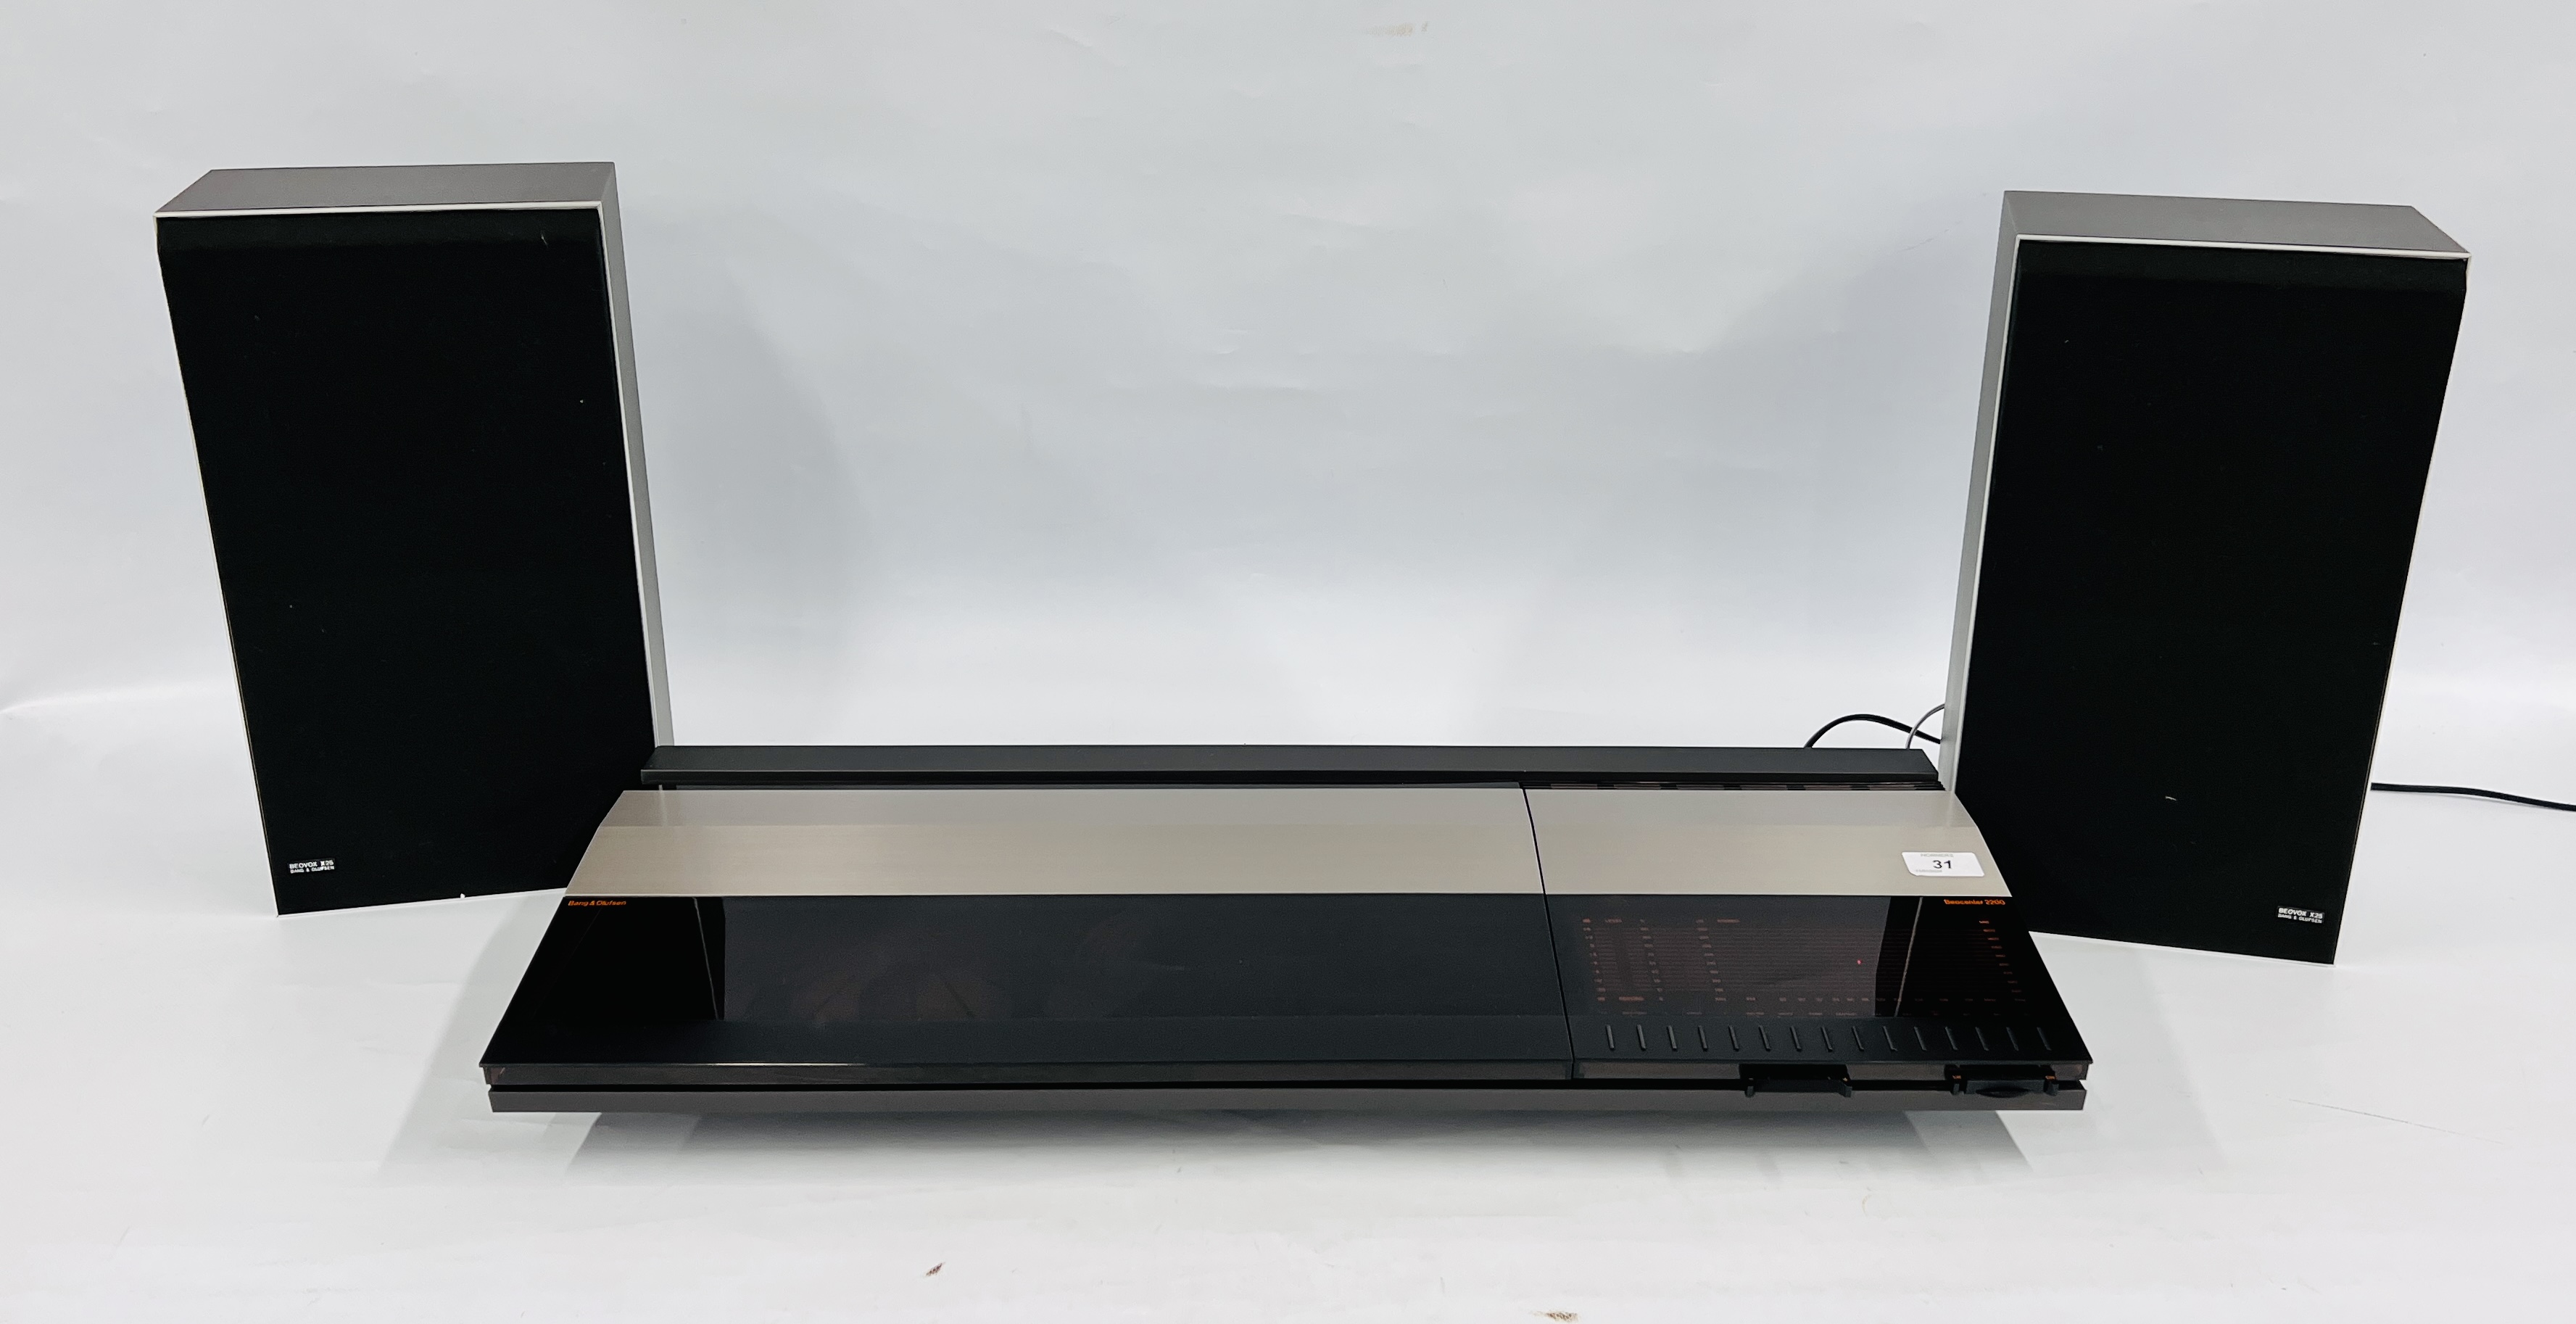 A BANG & OLUFSEN BEOCENTER 2200 HIFI COMPLETE WITH PAIR OF BANG & OLUFSEN BEOVOX X25 LOUDSPEAKERS -